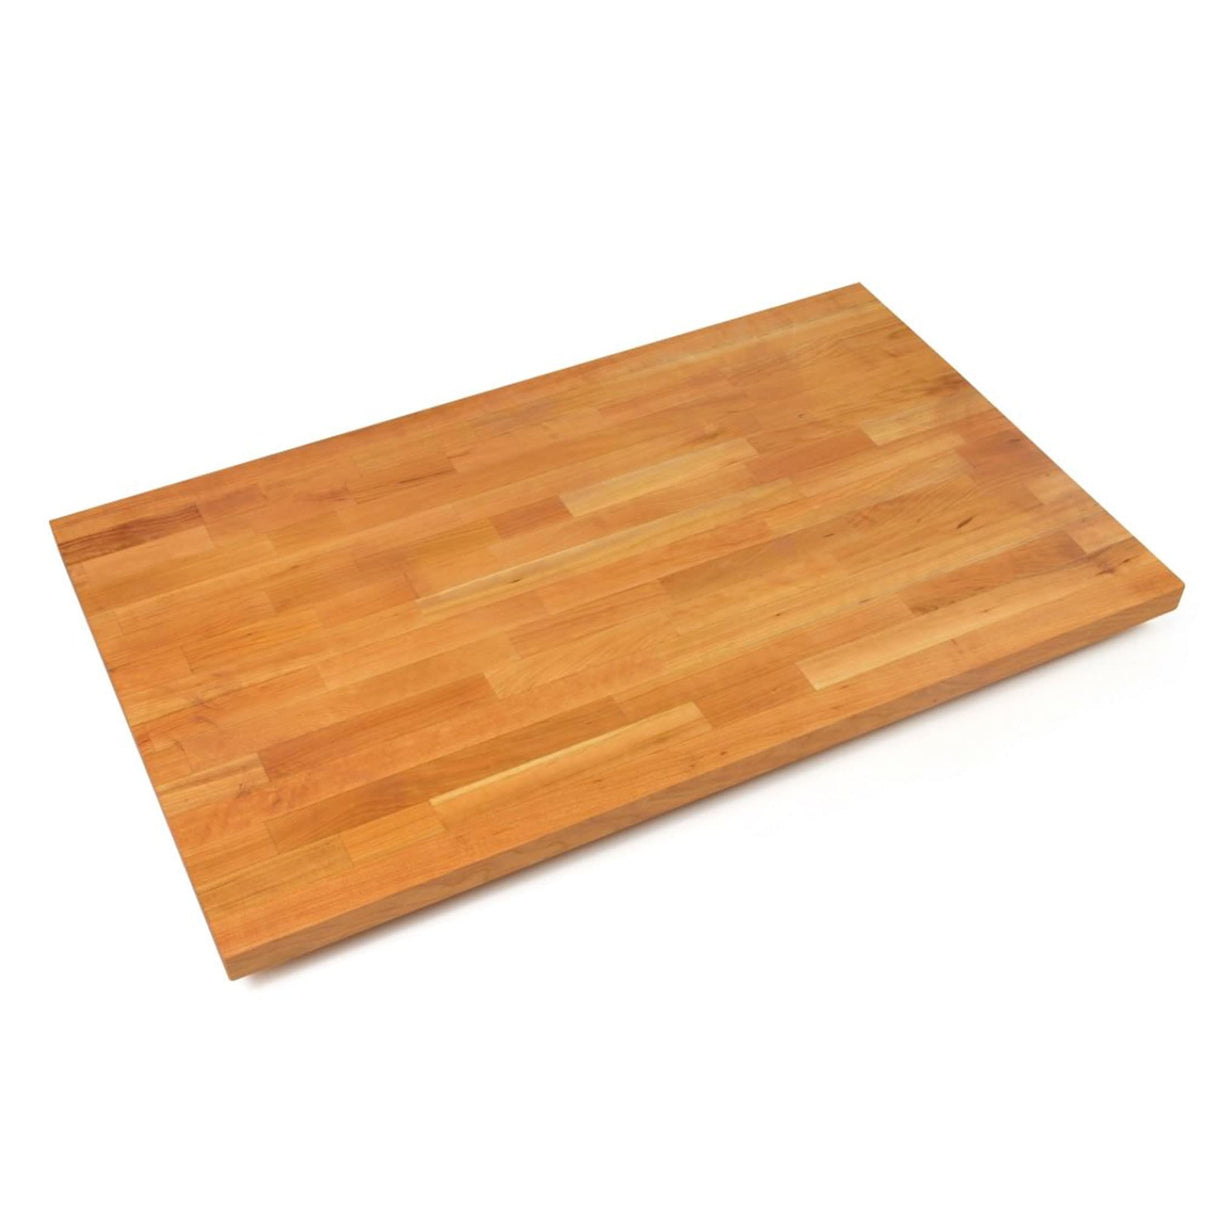 John Boos CHYKCT-BL3025-V CHYKCT-BL3025-O Finger Jointed Cherry Wood Rails Kitchen Island Butcher Block Cutting Board Counter Top with Oil Finish, 30" x 25" 1.5" CHERRY BLENDED KCT 30X25X1-1/2 VAR